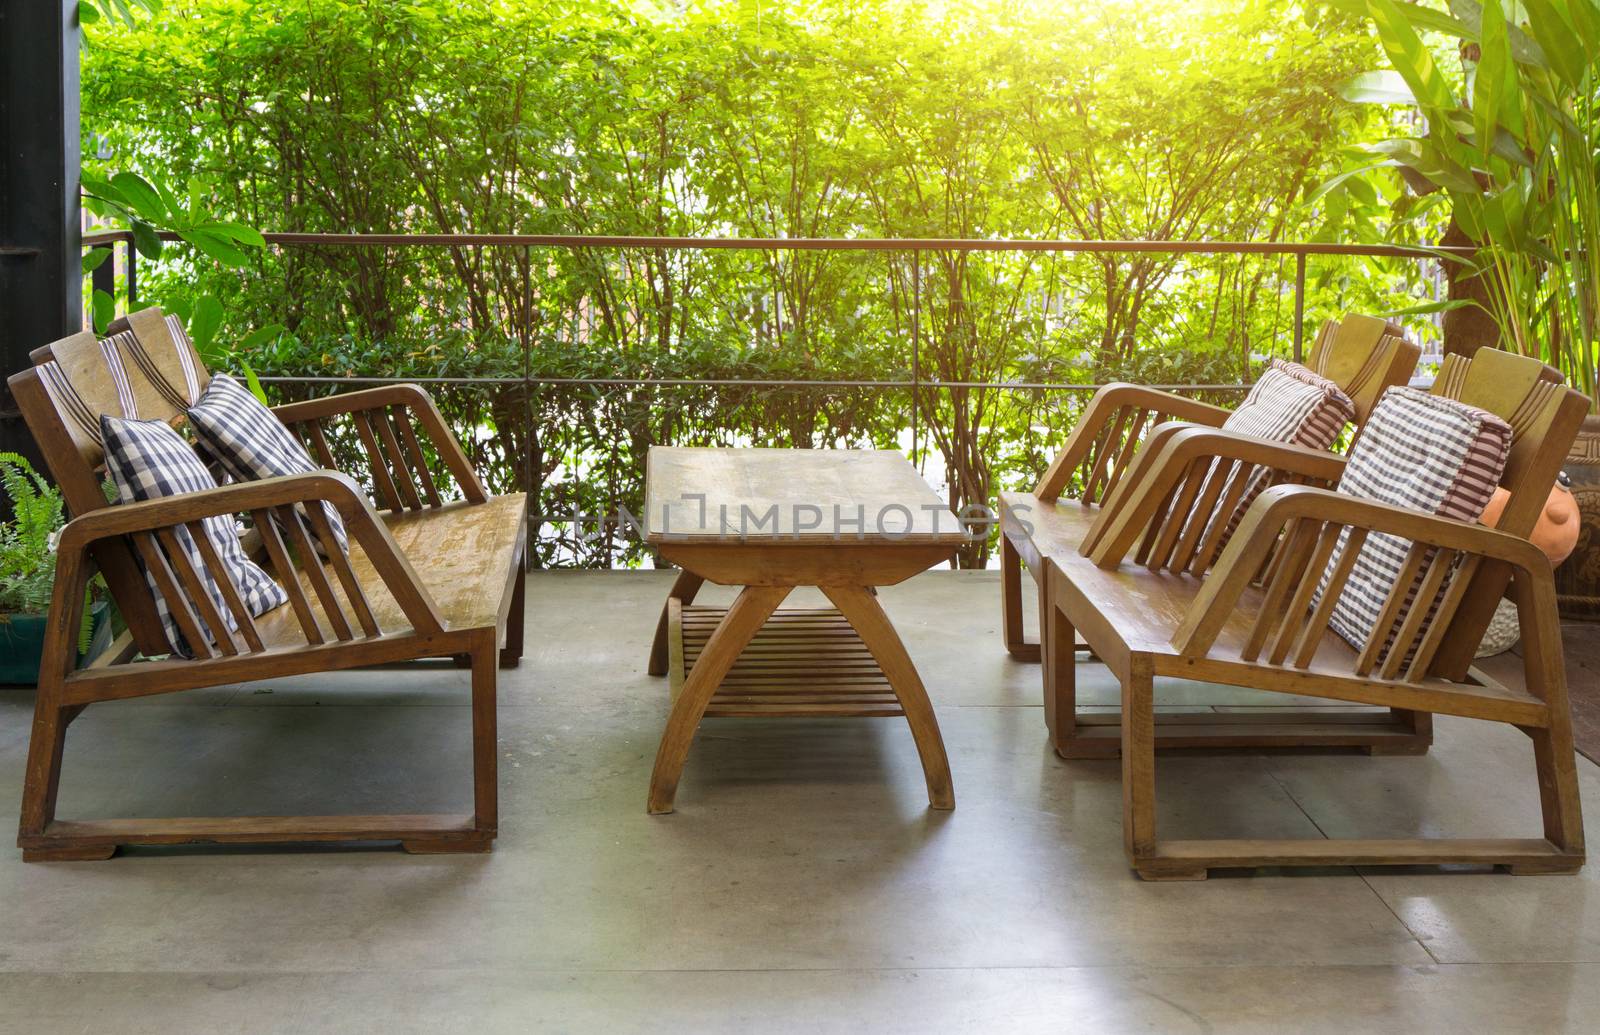 Wooden table and chairs outdoor furniture in the garden for relaxation